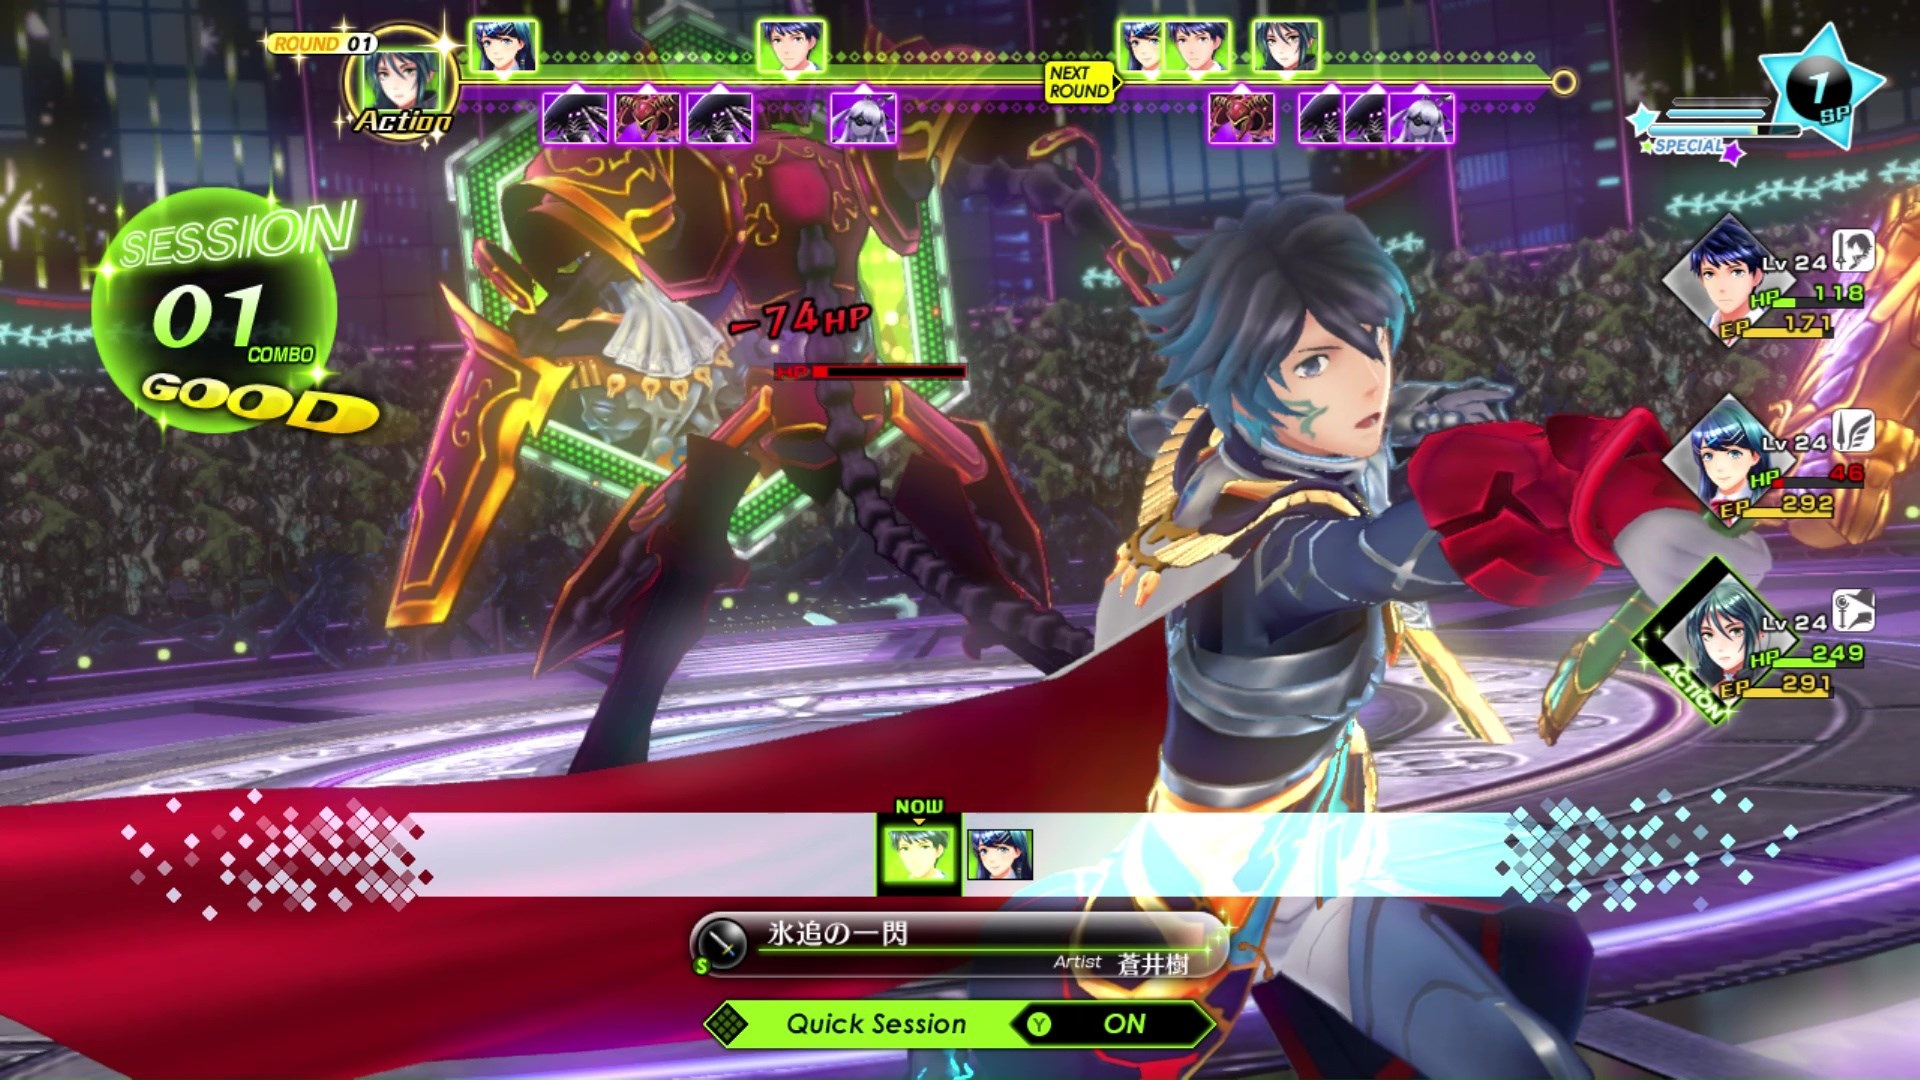 Nintendo Download: Pre-Purchase Tokyo Mirage Sessions #FE Encore Now! (Jan. 9, 2020)